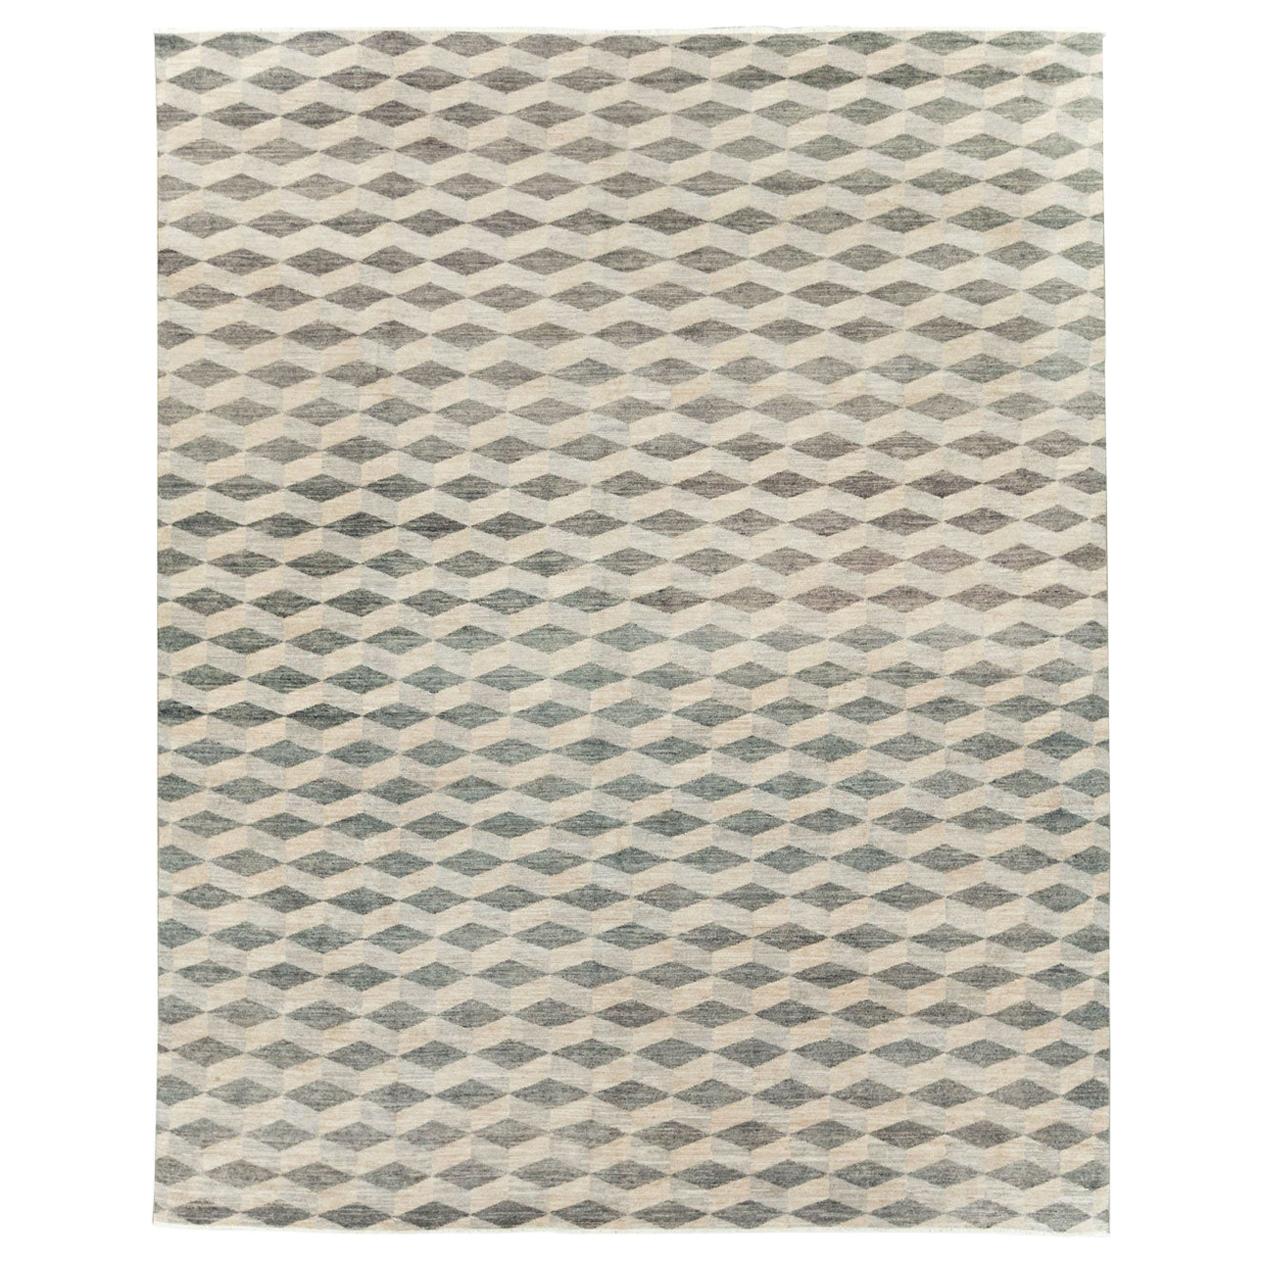 Contemporary Turkish Room Size Carpet with a Neutral Toned Diamond Cube Pattern For Sale